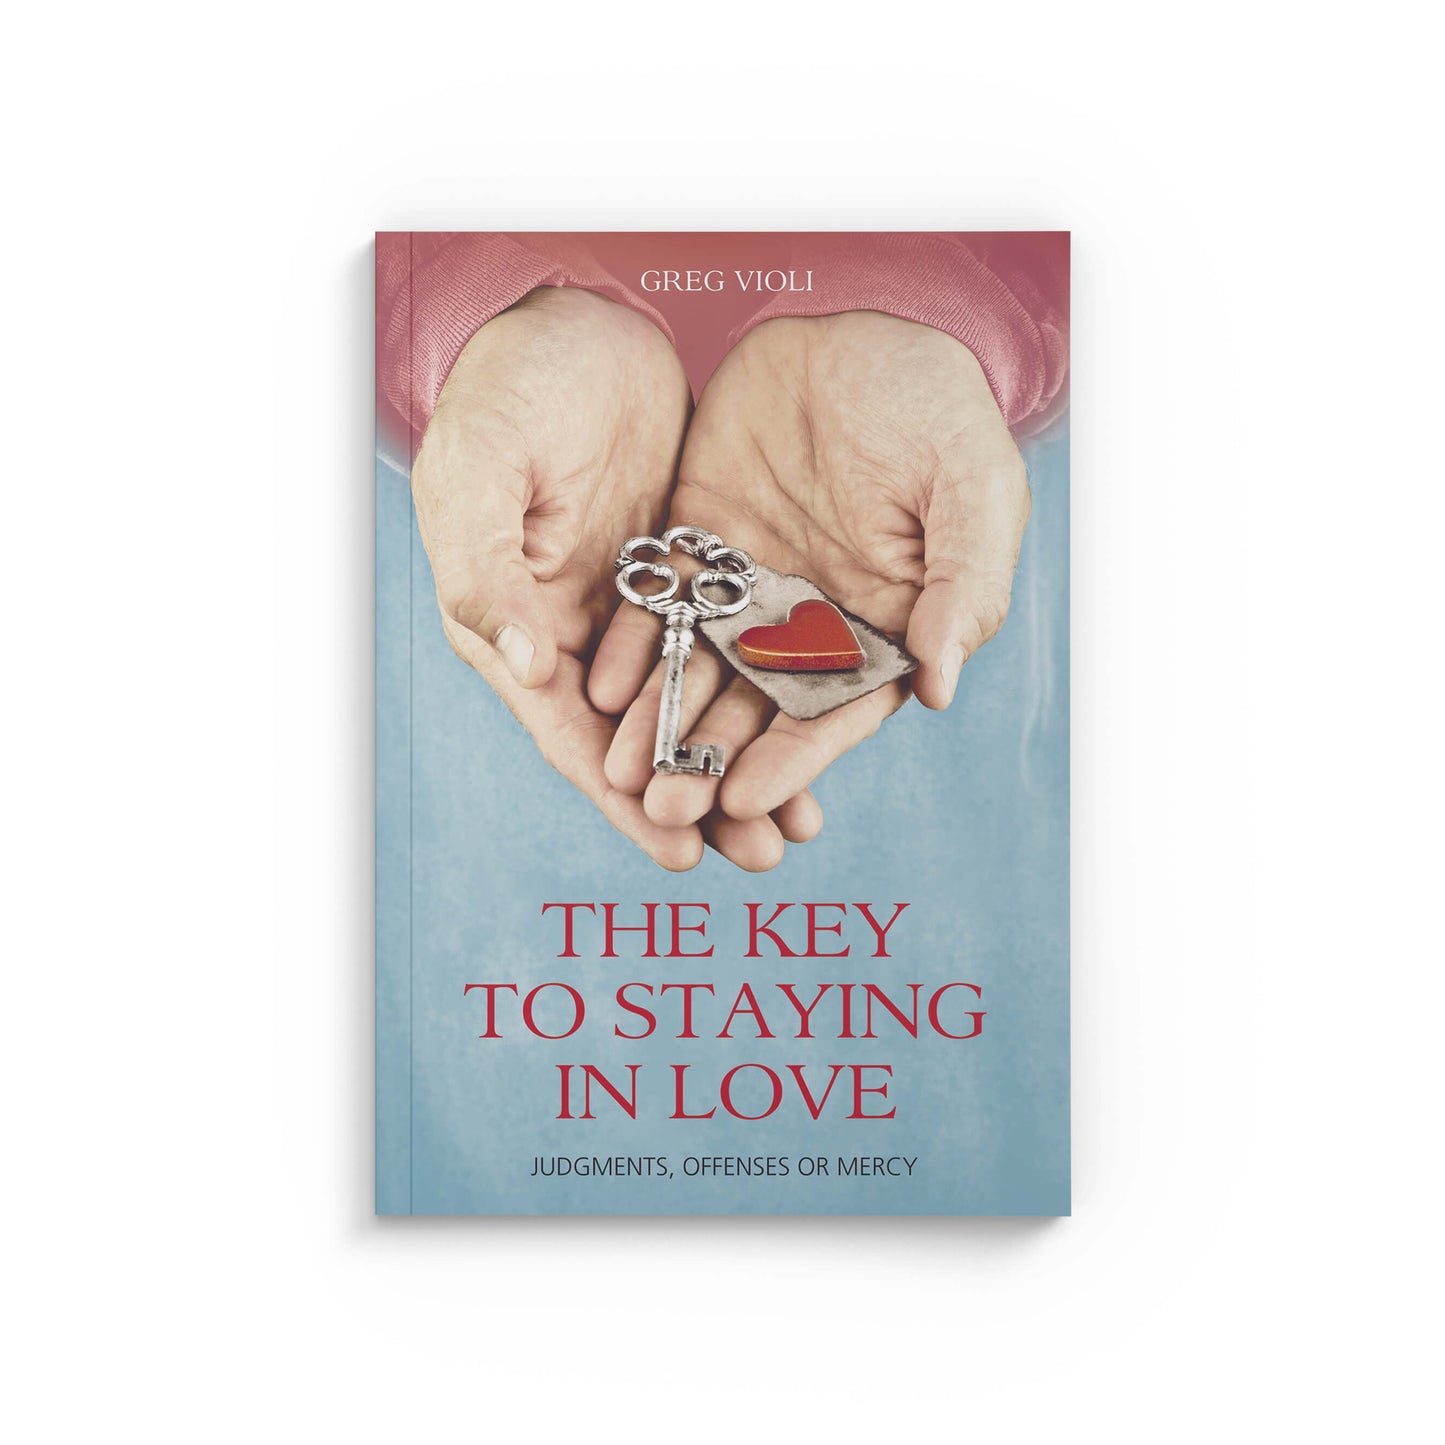 The Key to Staying in Love